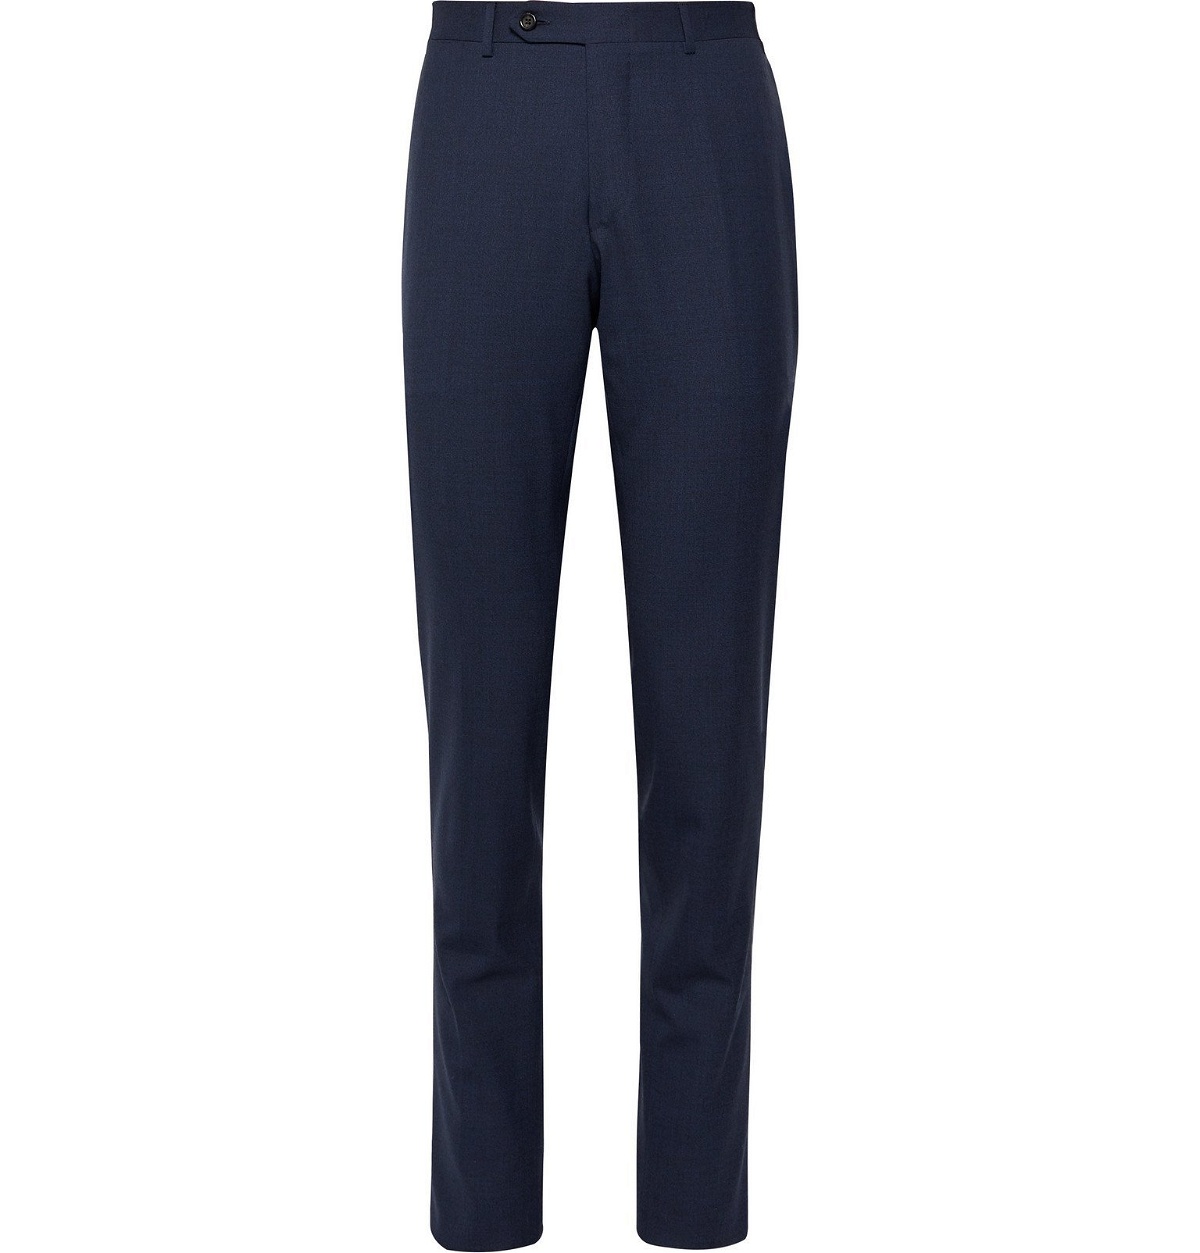 Canali - Storm-Blue Kei Wool Suit Trousers - Blue Canali